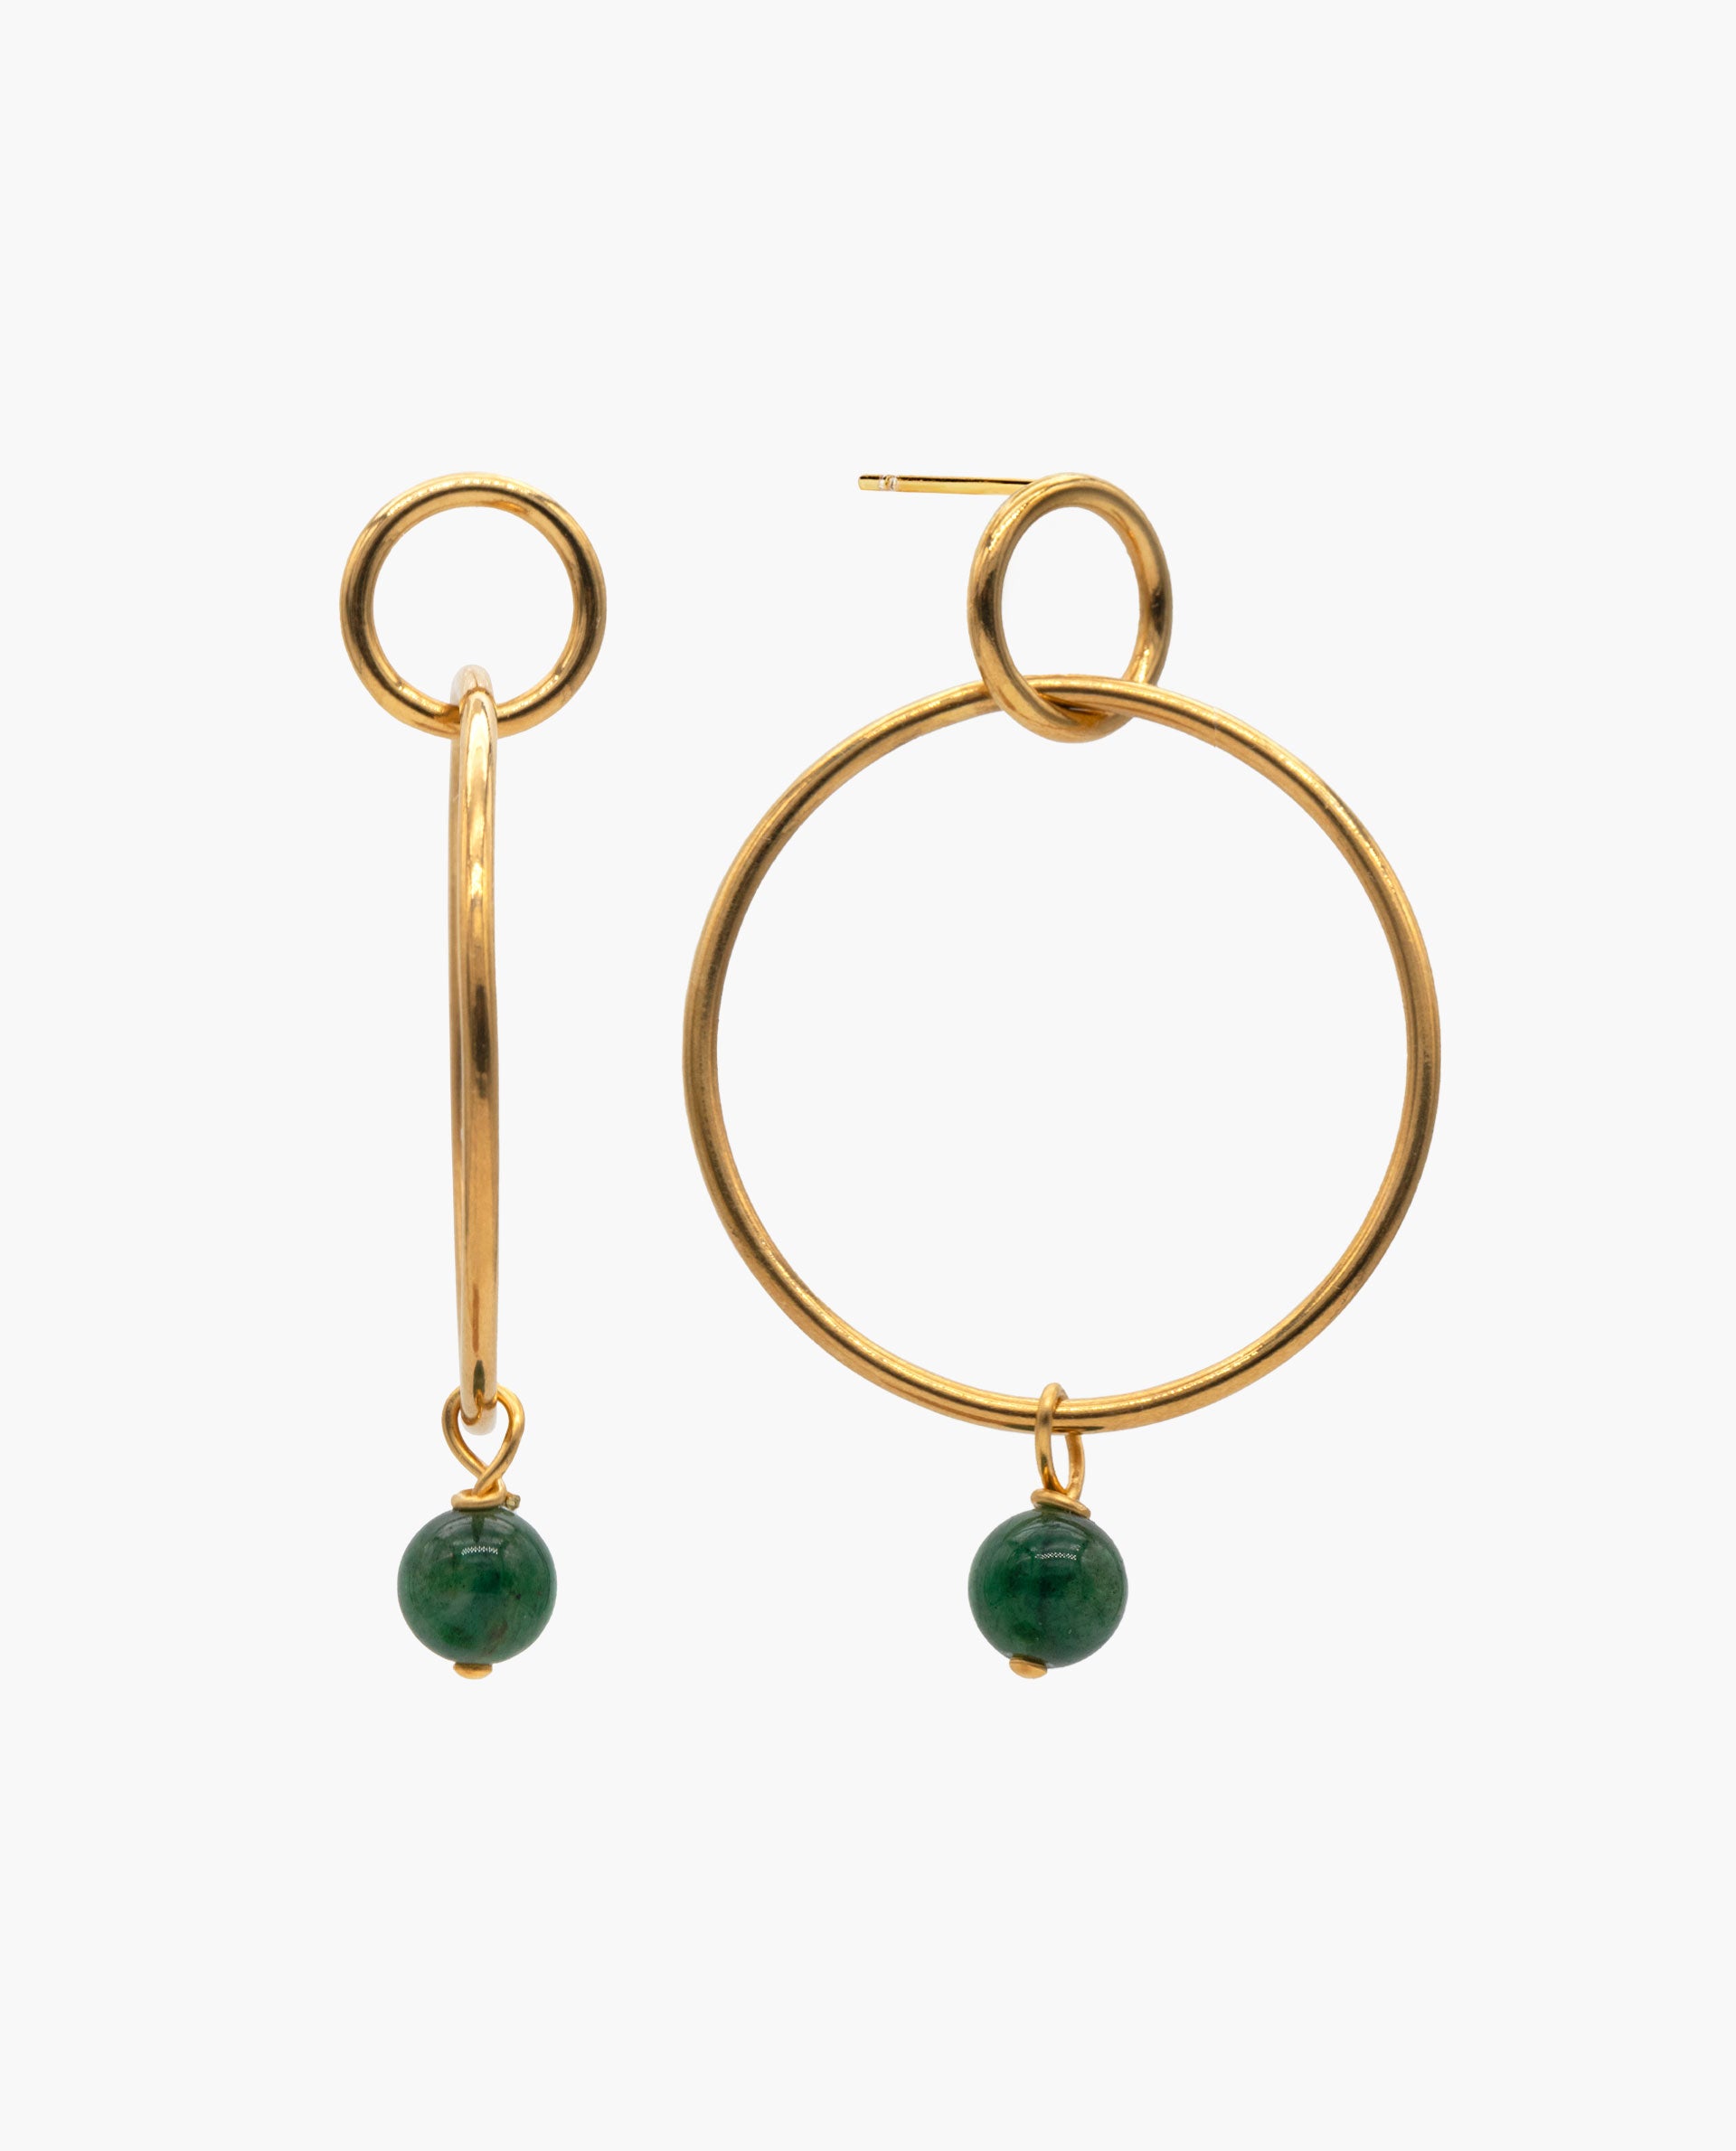 WISH GREEN AGATE EARRINGS - GOLD PLATED